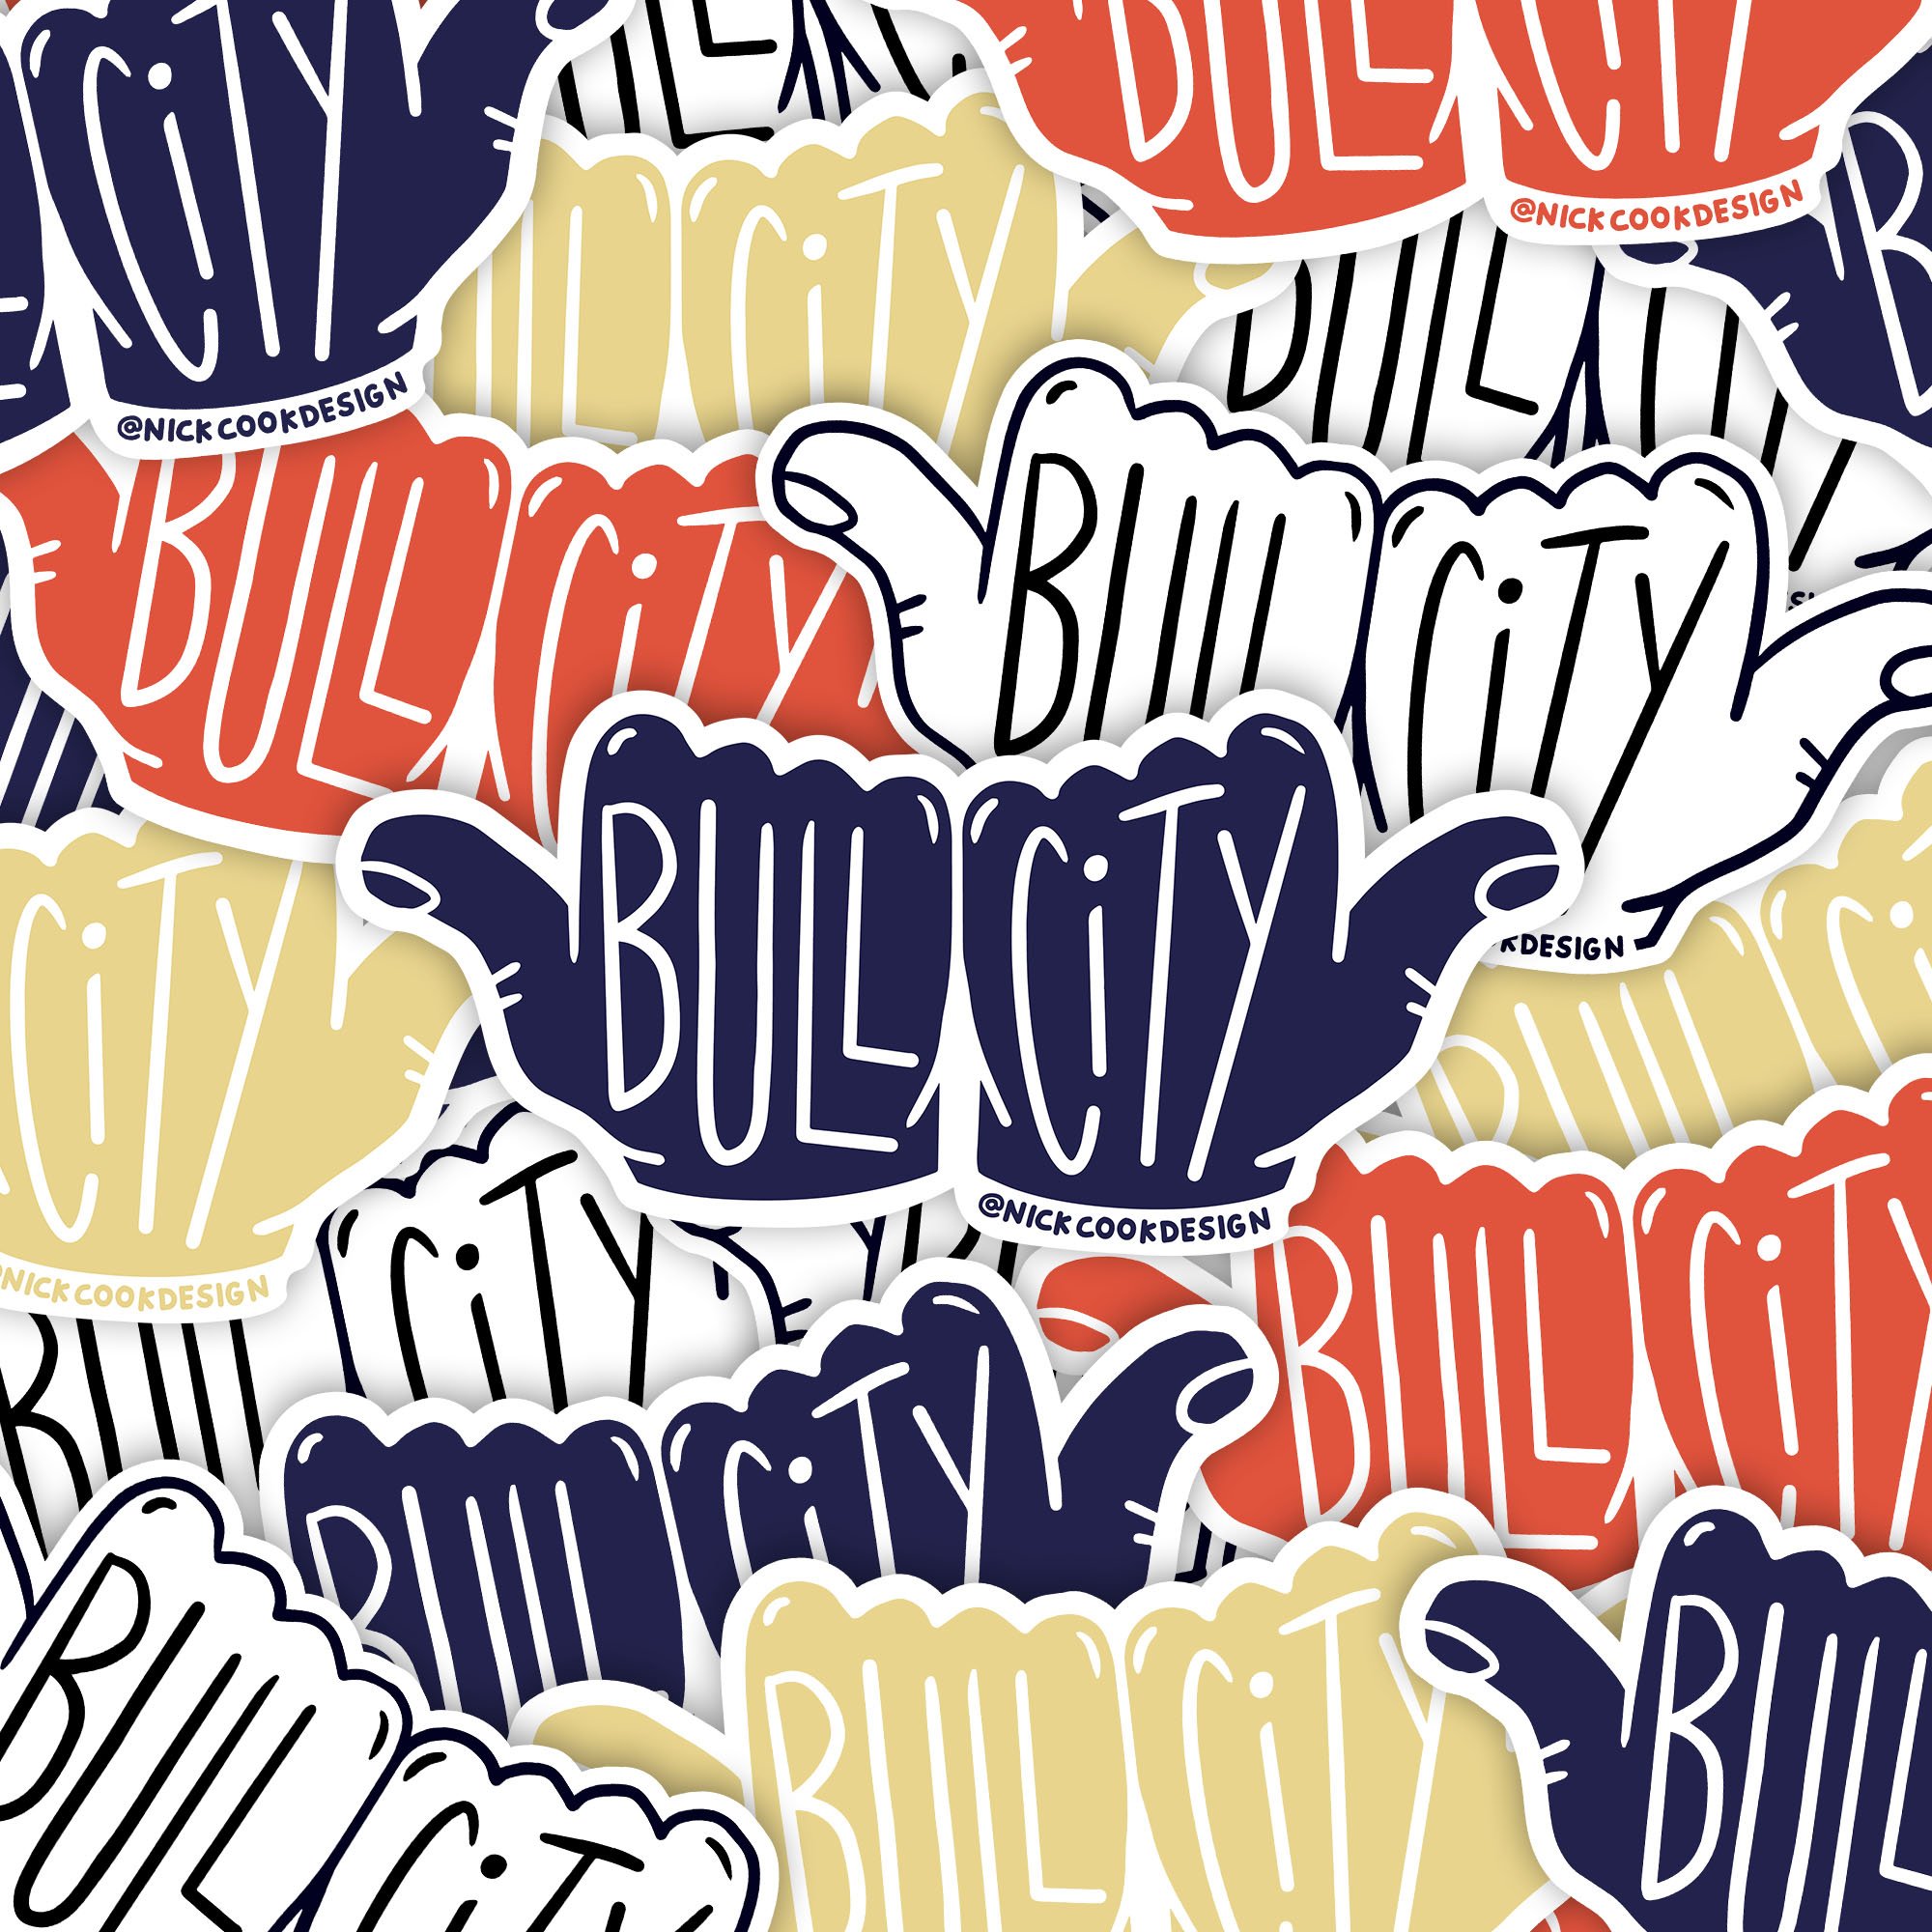 Bull City Hands Stickers Collage.jpg